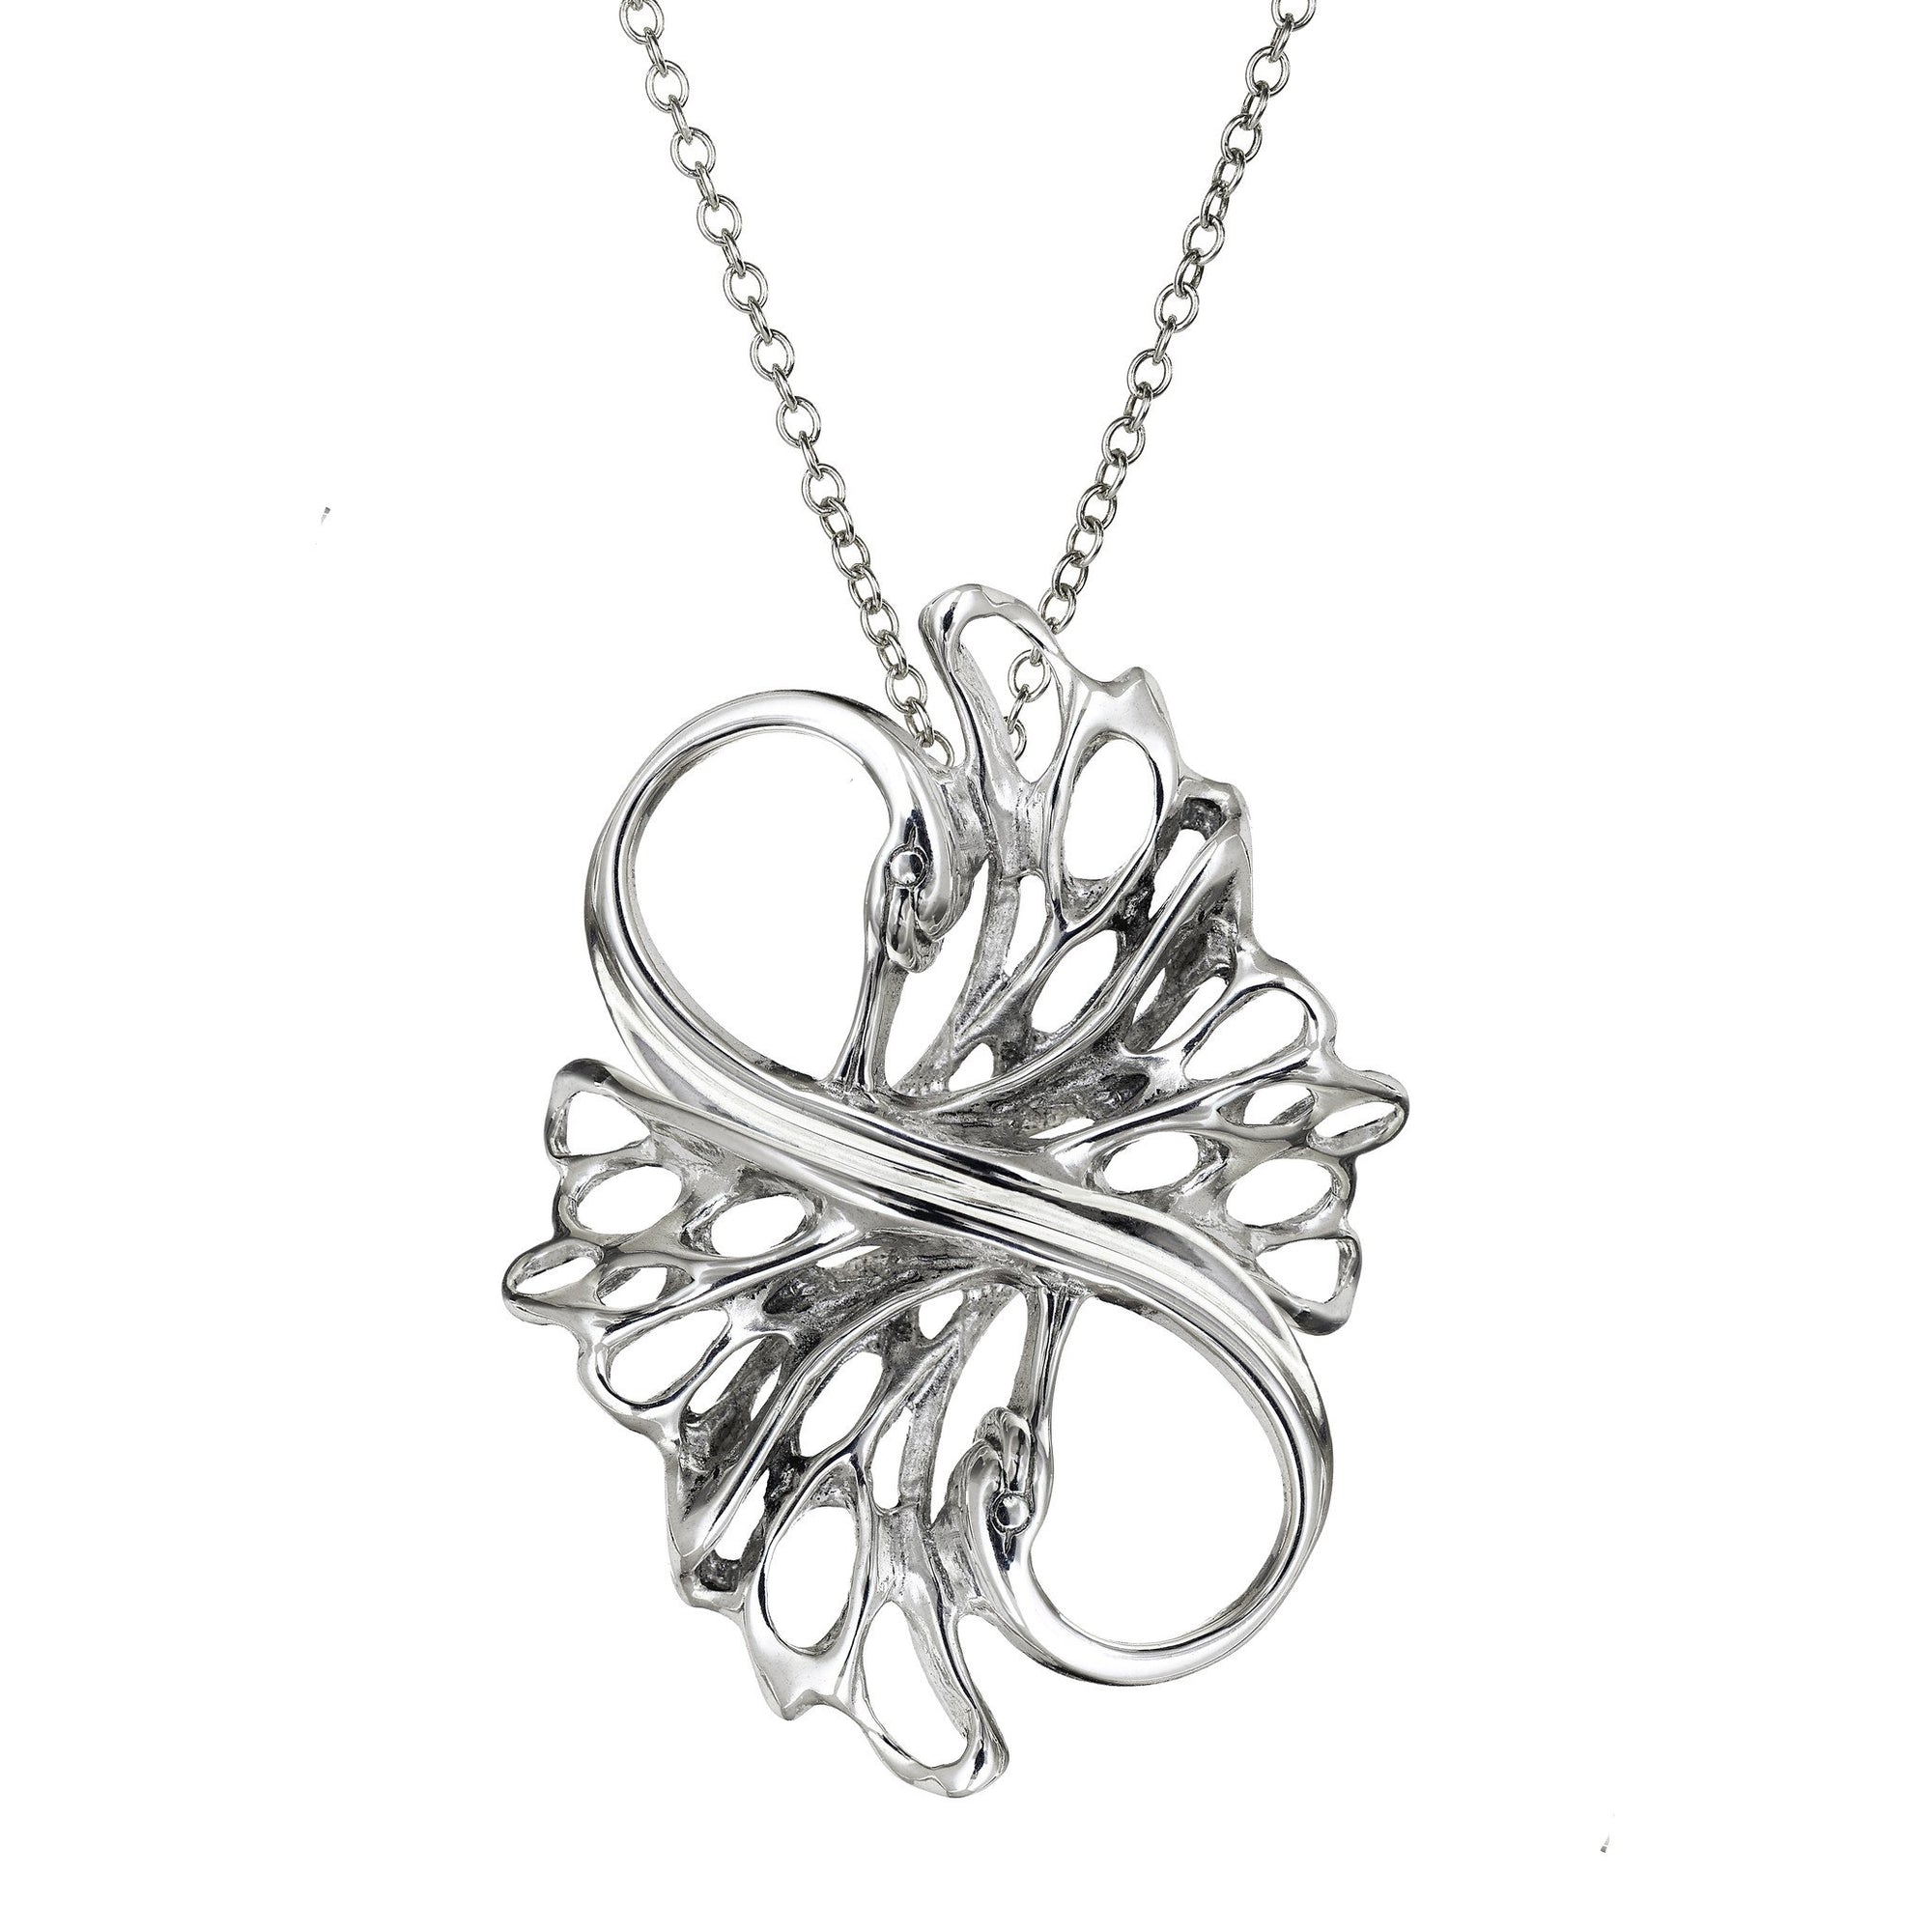 Sterling Silver Irish Jewellery, a Swan Pendant that can be purchased as a gift set to show your love!